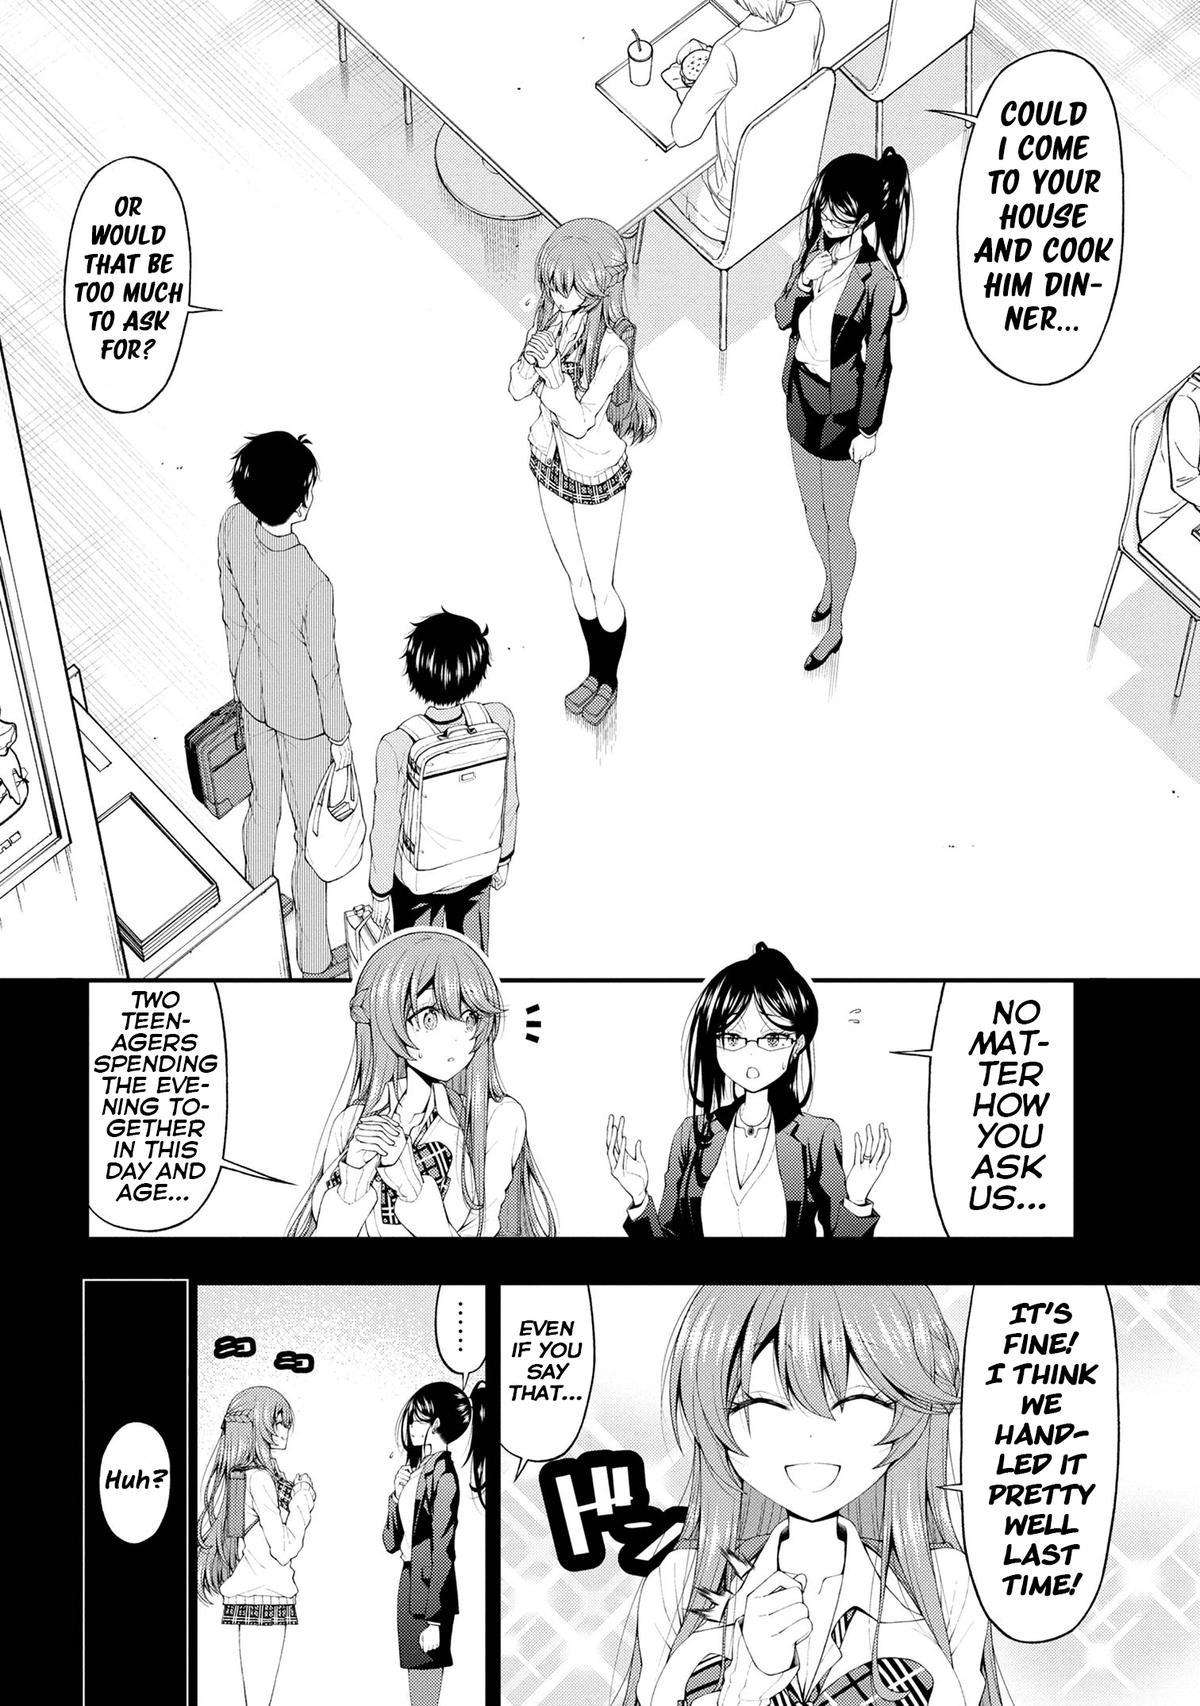 The Gal Who Was Meant to Confess to Me as a Game Punishment - chapter 16 - #2